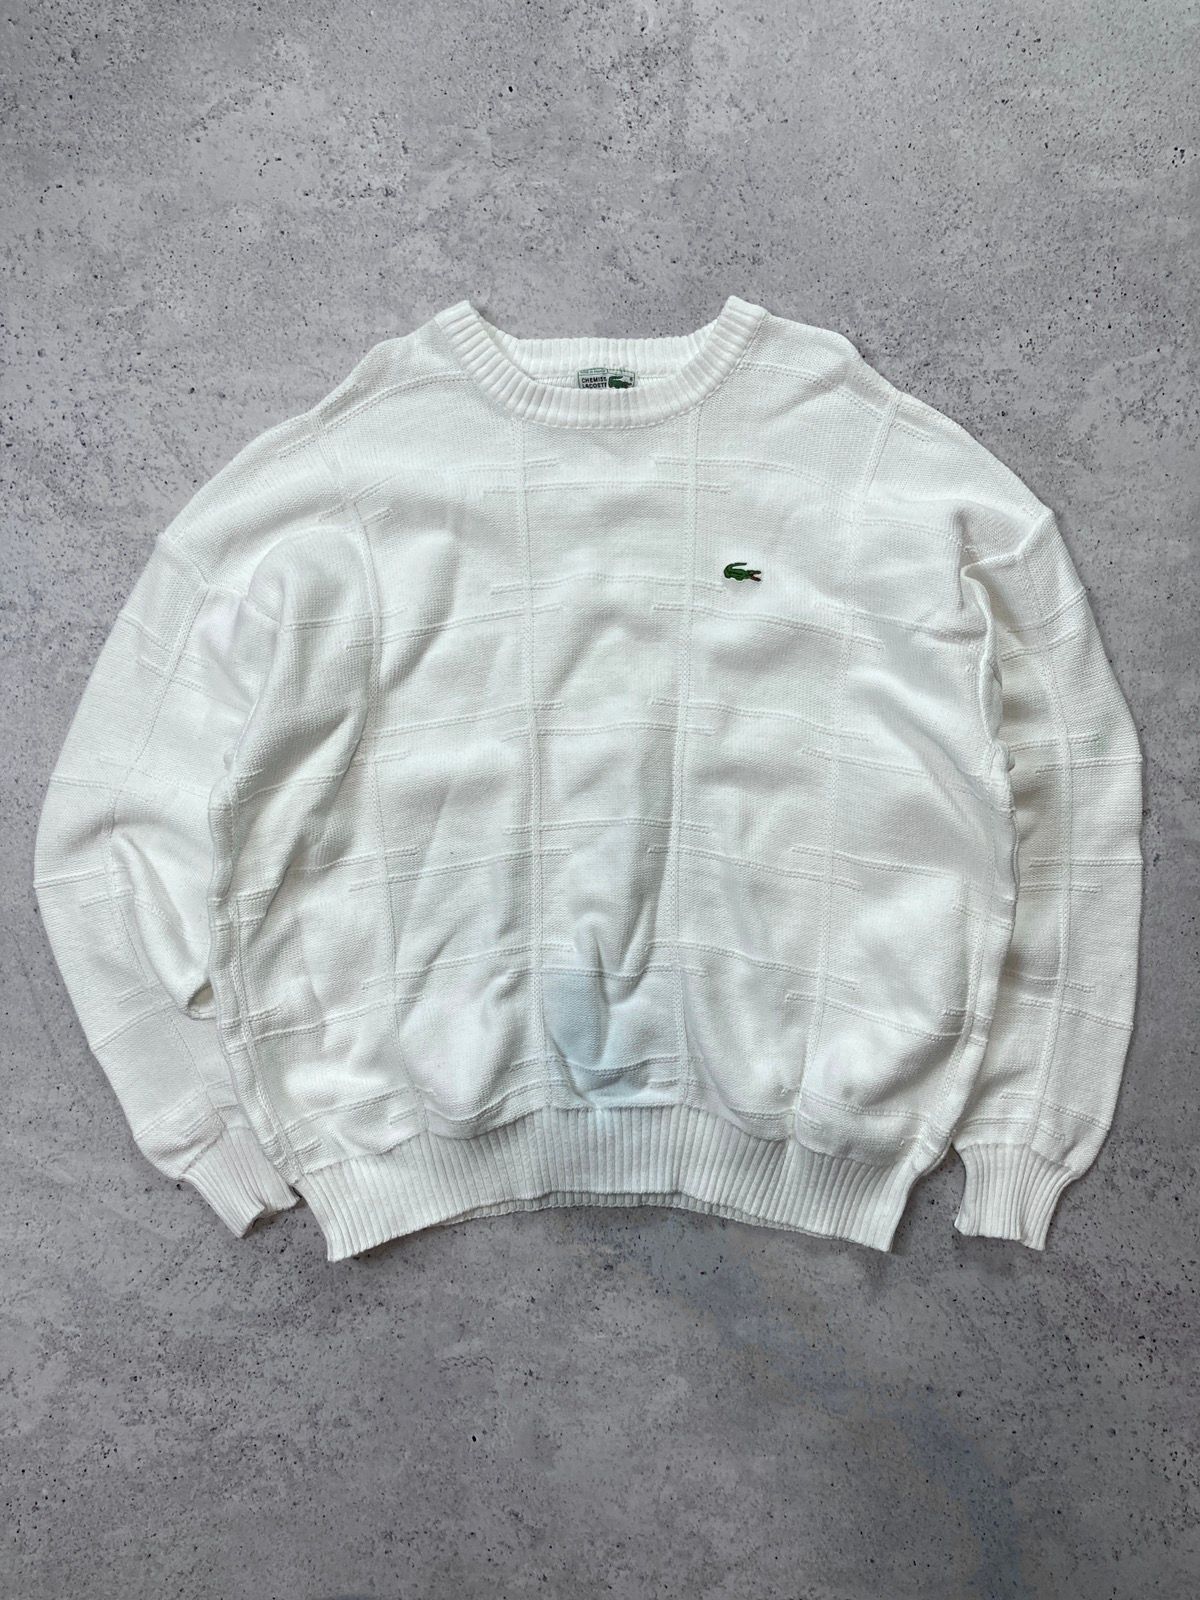 Pre-owned Cardigan X Lacoste 90's! Vintage Lacoste Sweater Knit Archive In White